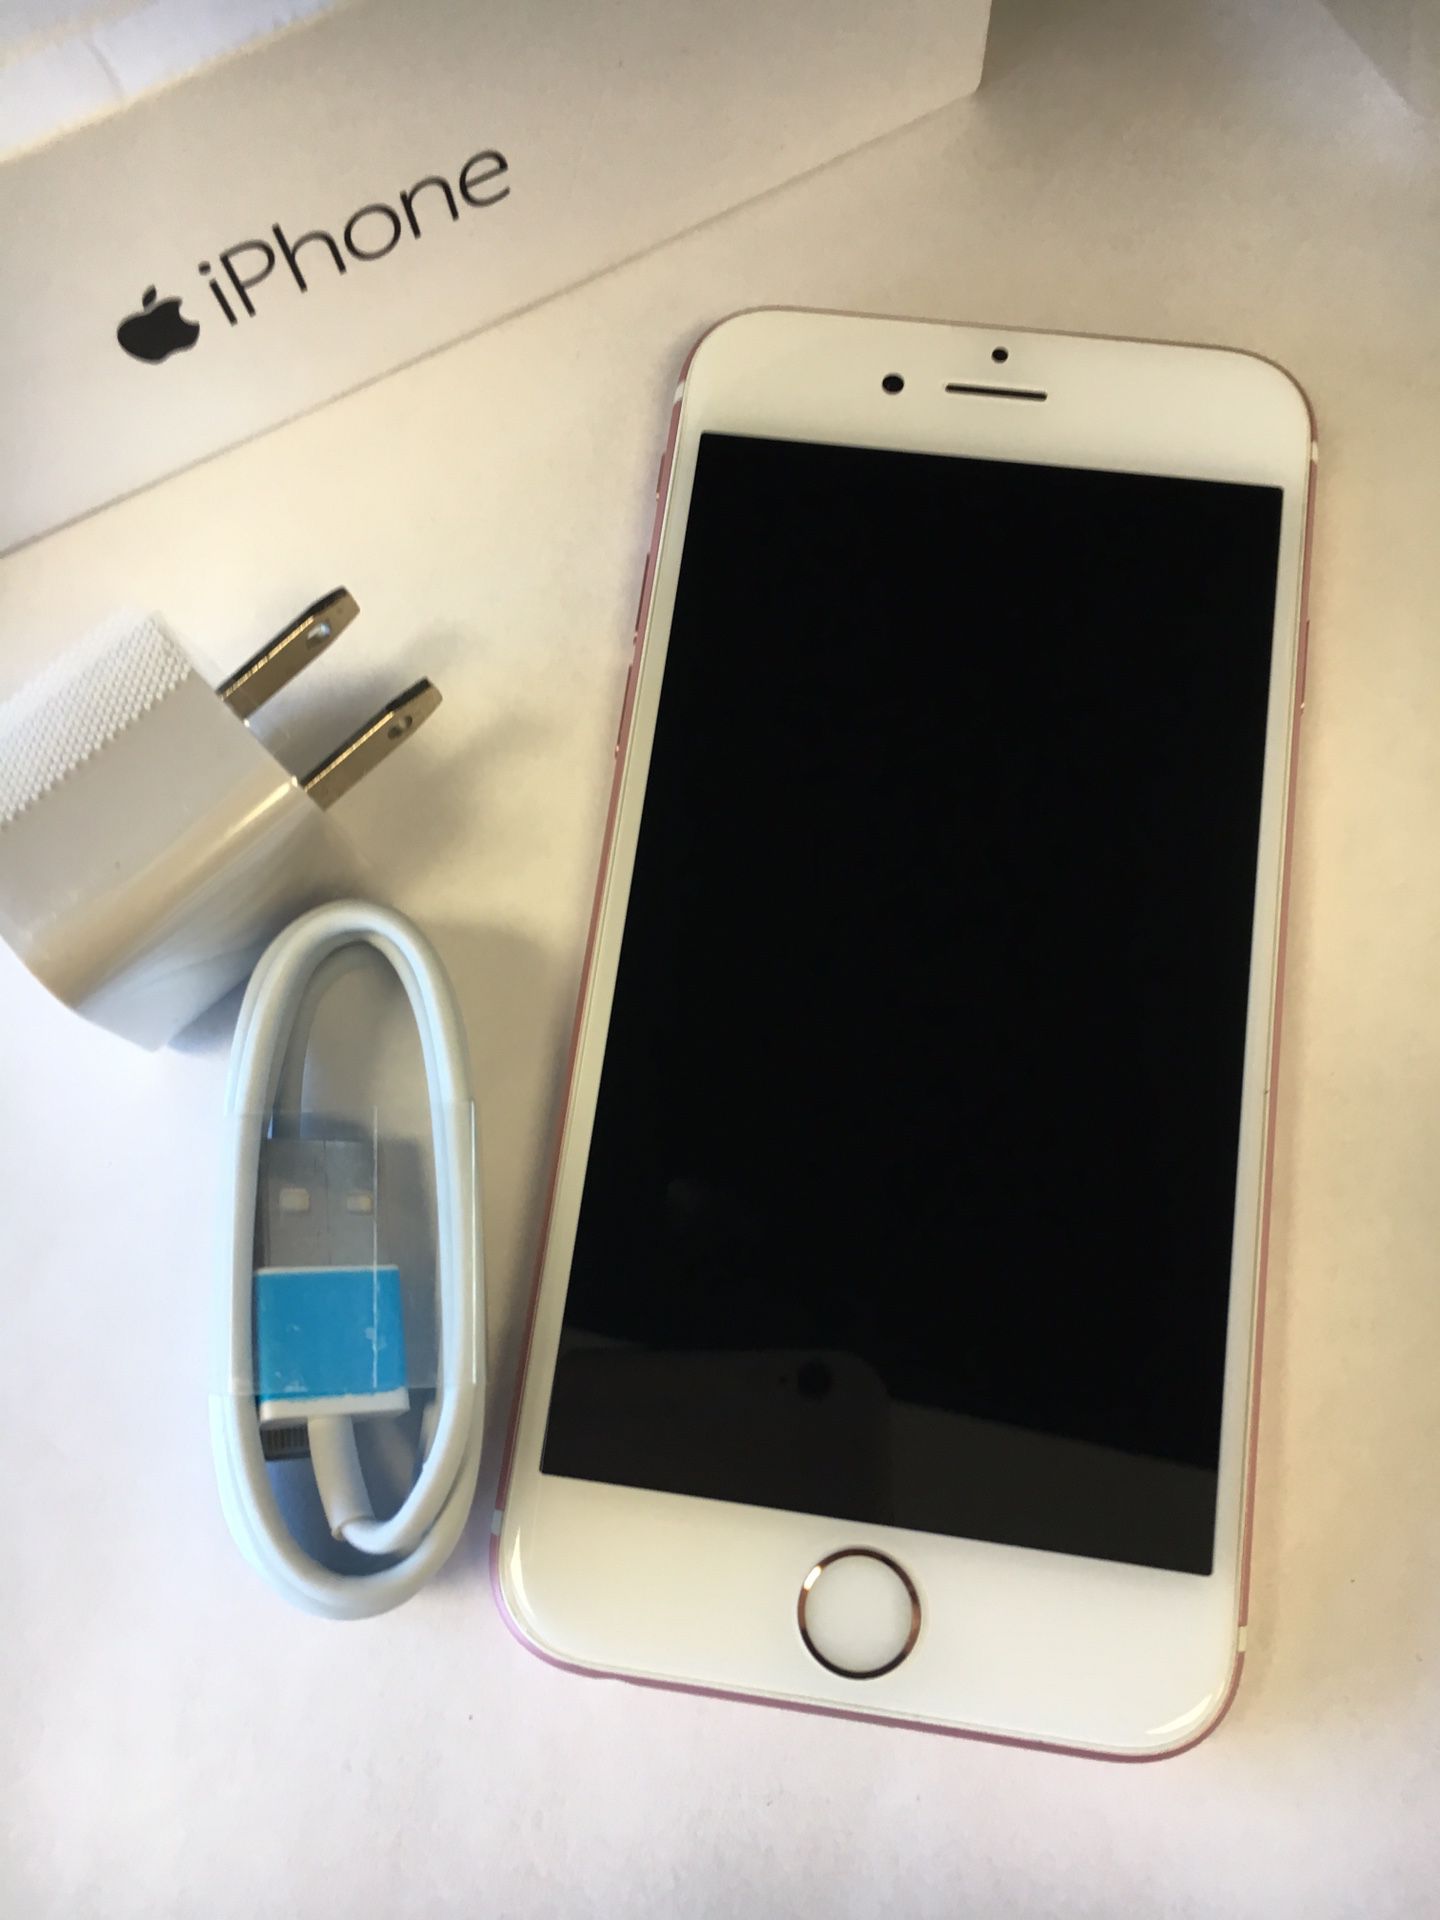 Iphone 6S excellent condition factory unlocked comes with charger